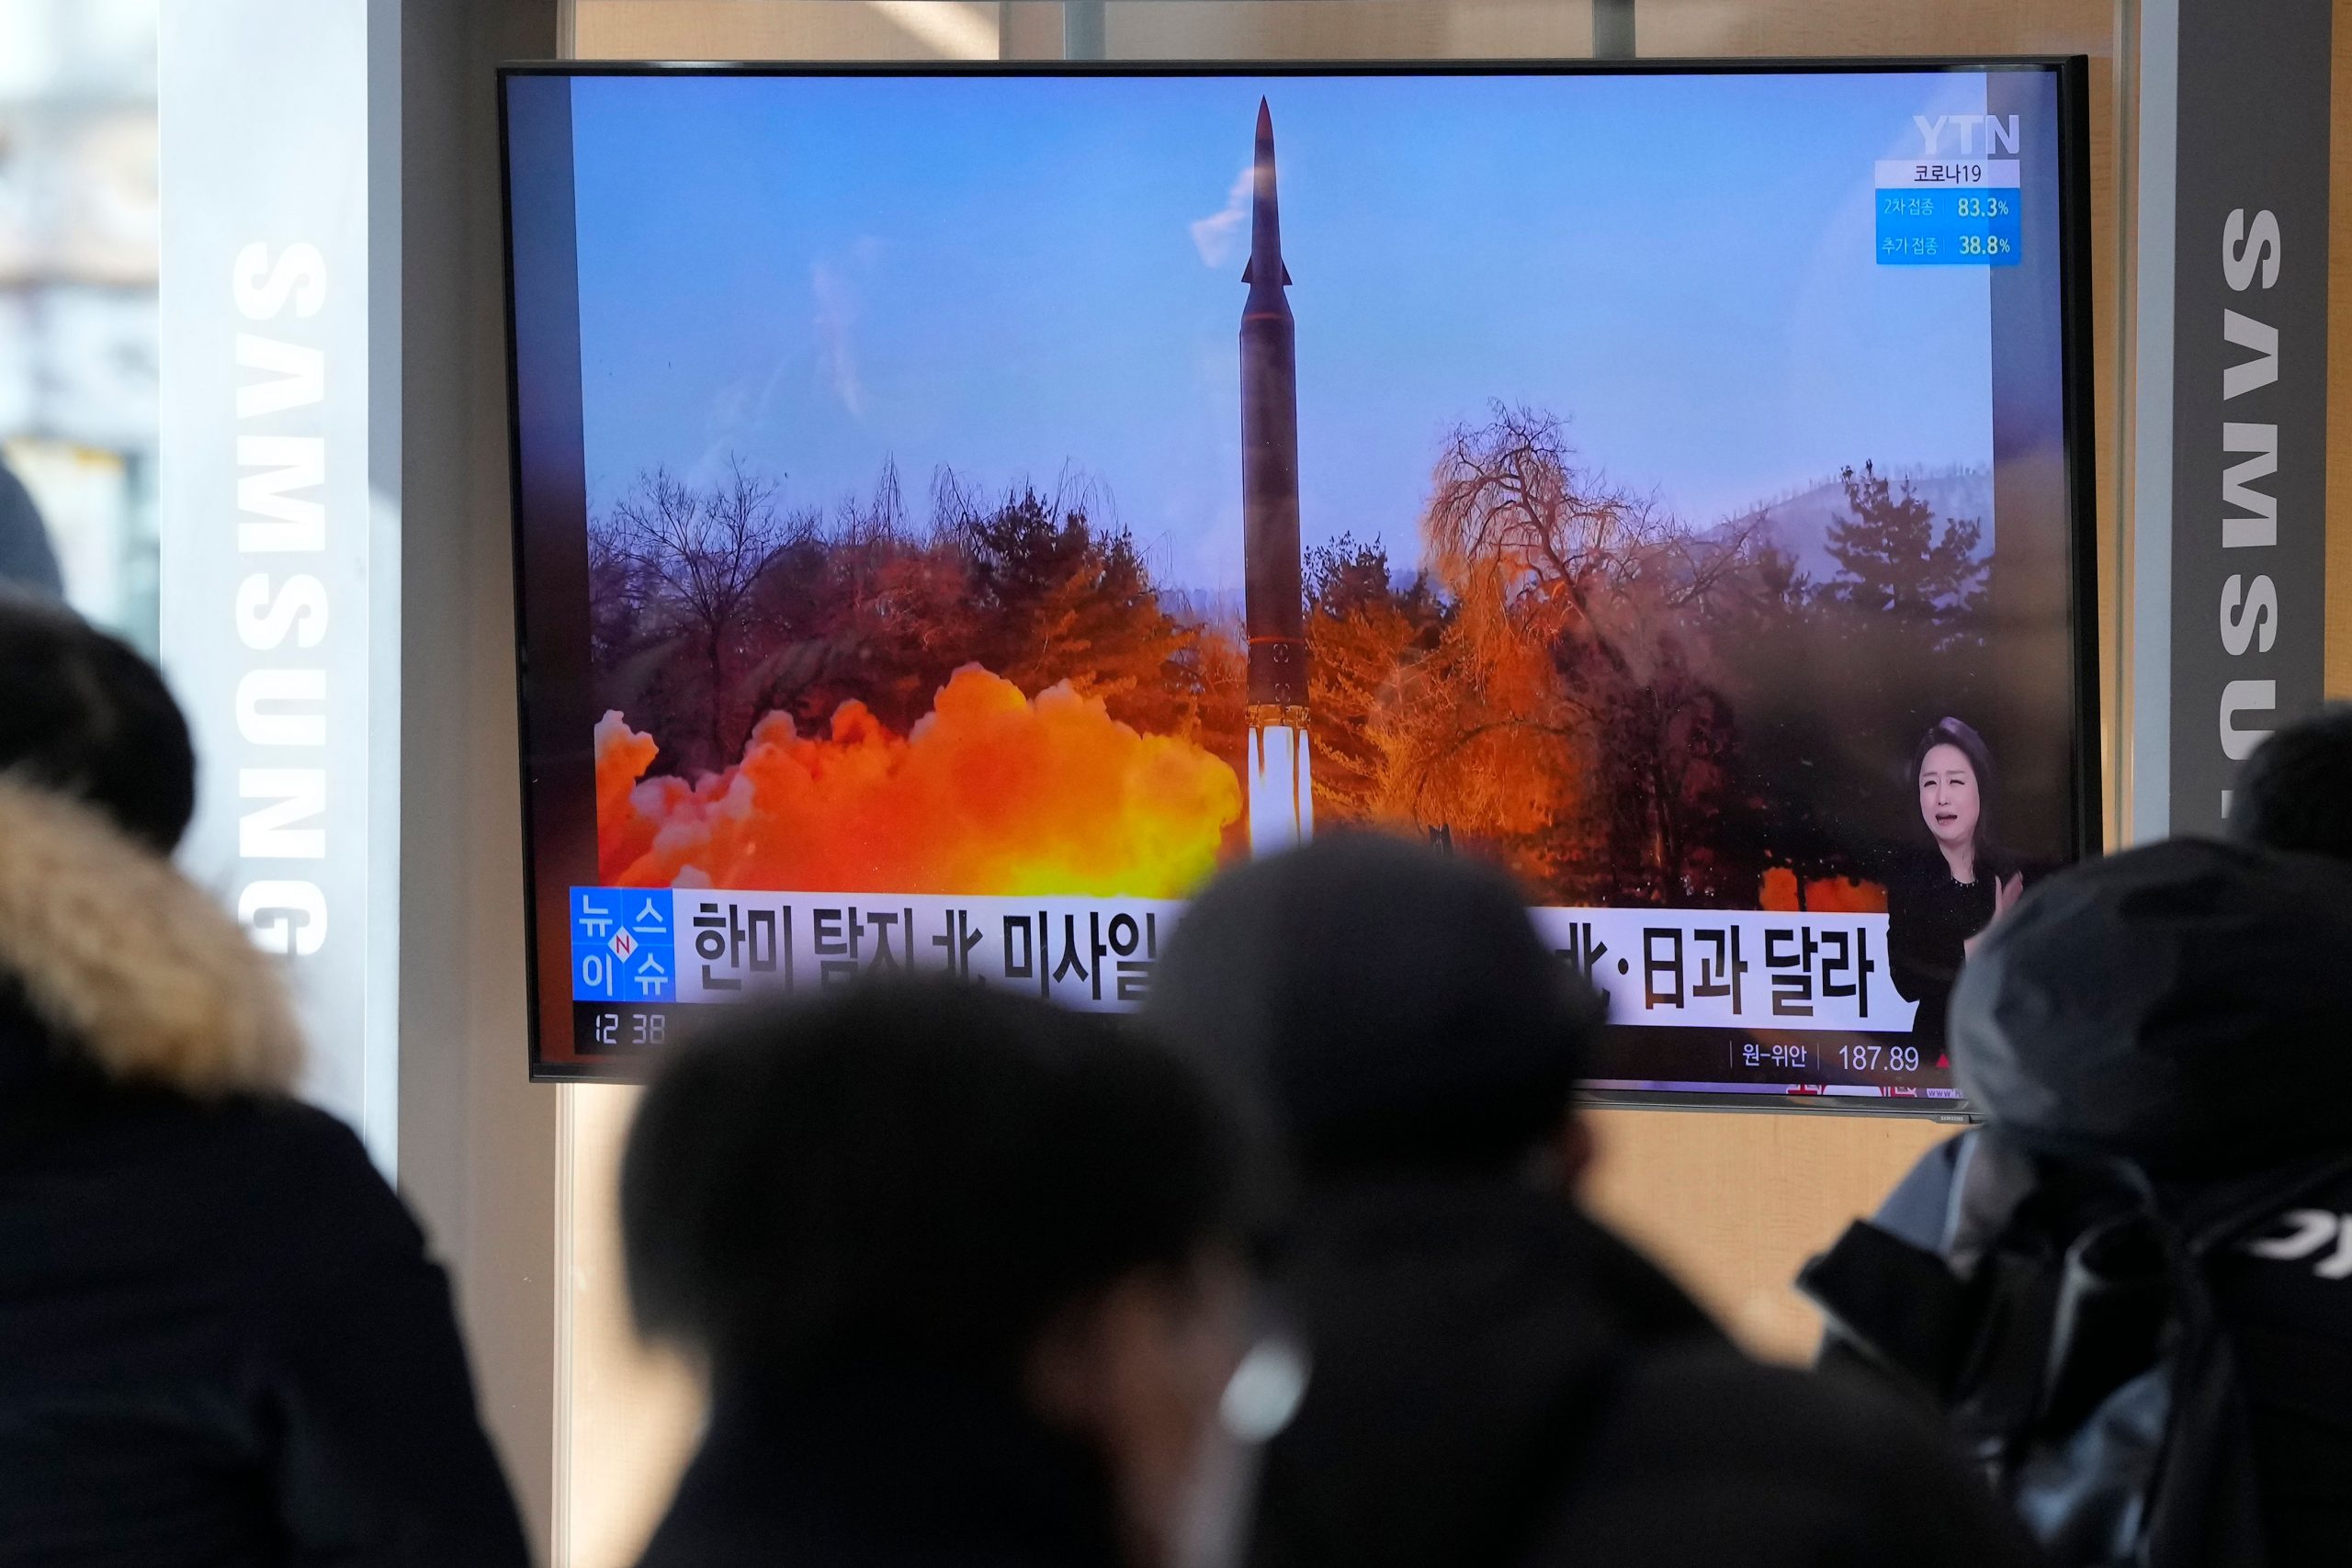 North Korea has fired possible missile into sea, Japan says